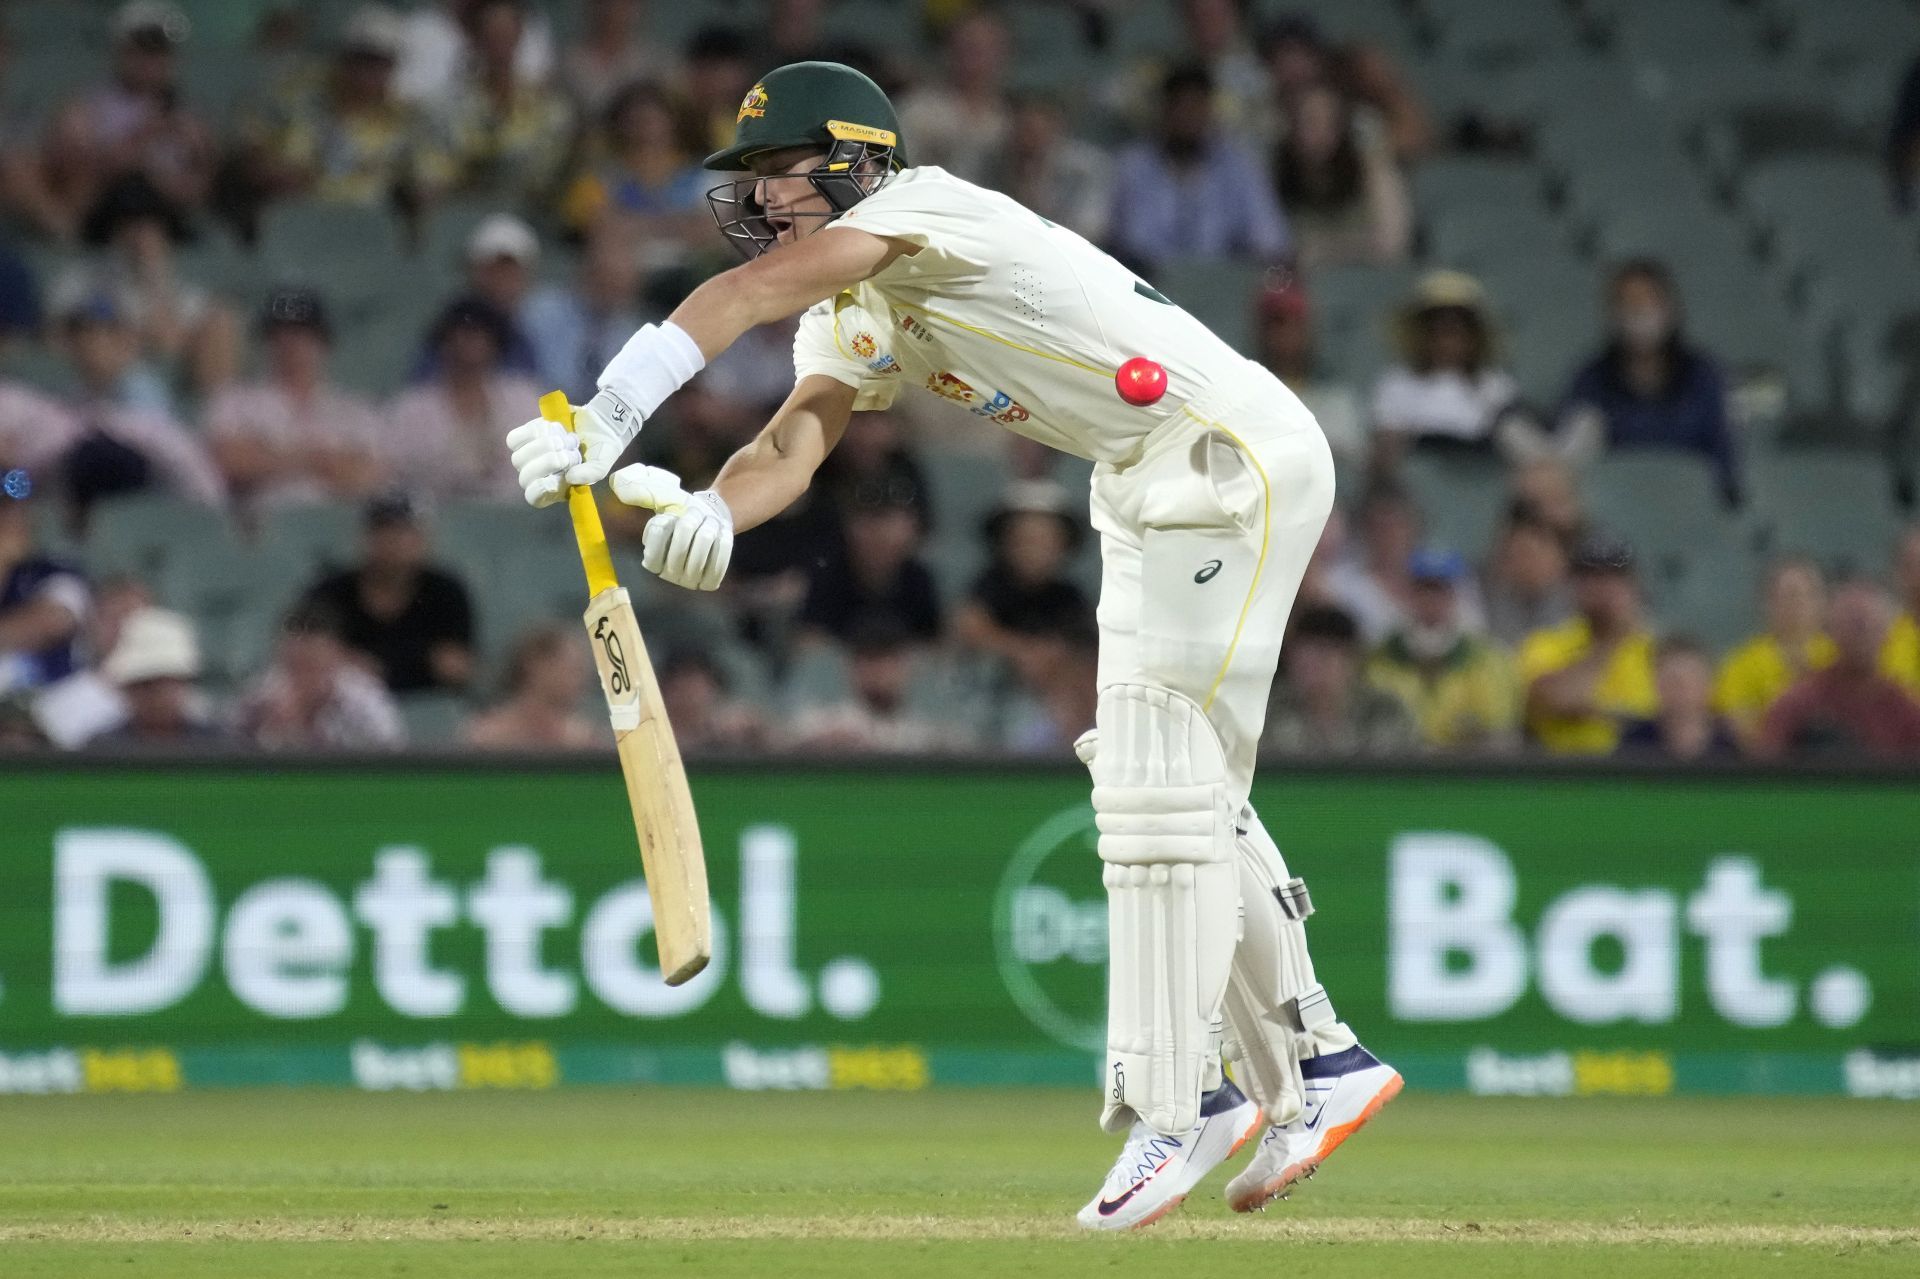 Labuschagne had to work hard for his runs on Day 1 of the second Ashes Test